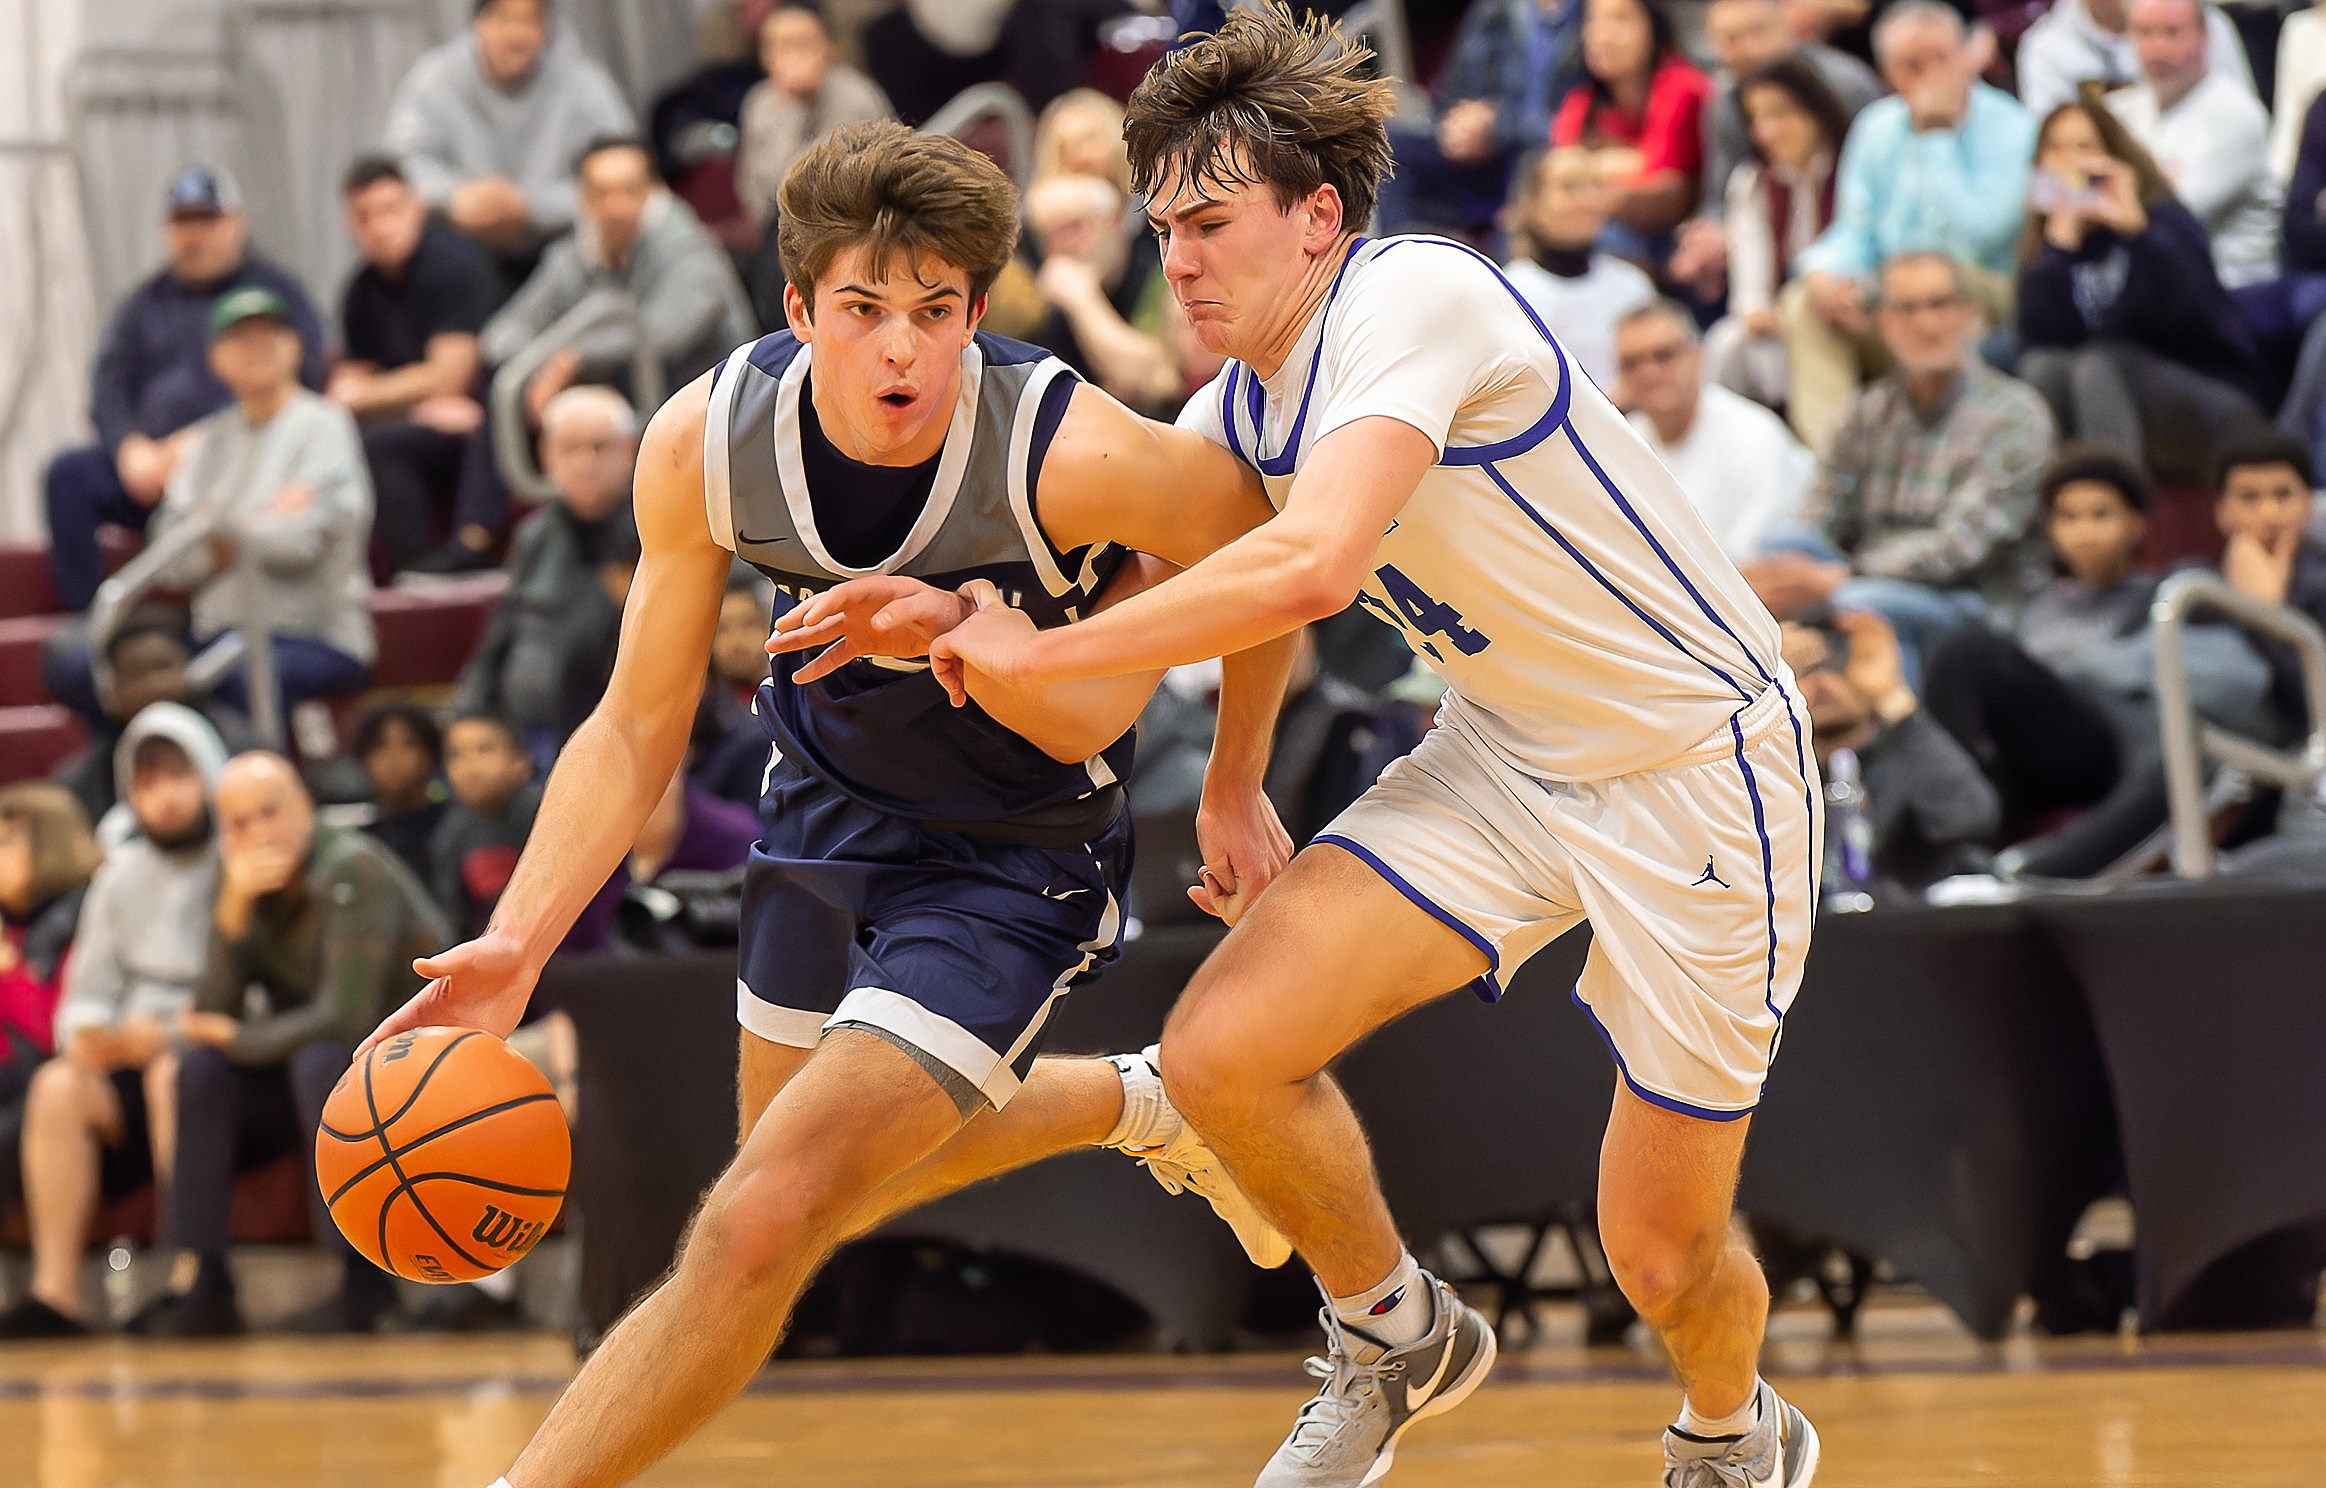 Manasquan junior Griffin Linstra guarded by Holmdel senior James Vallillo. (Photo: Tom Smith | tspsportsimages.com)